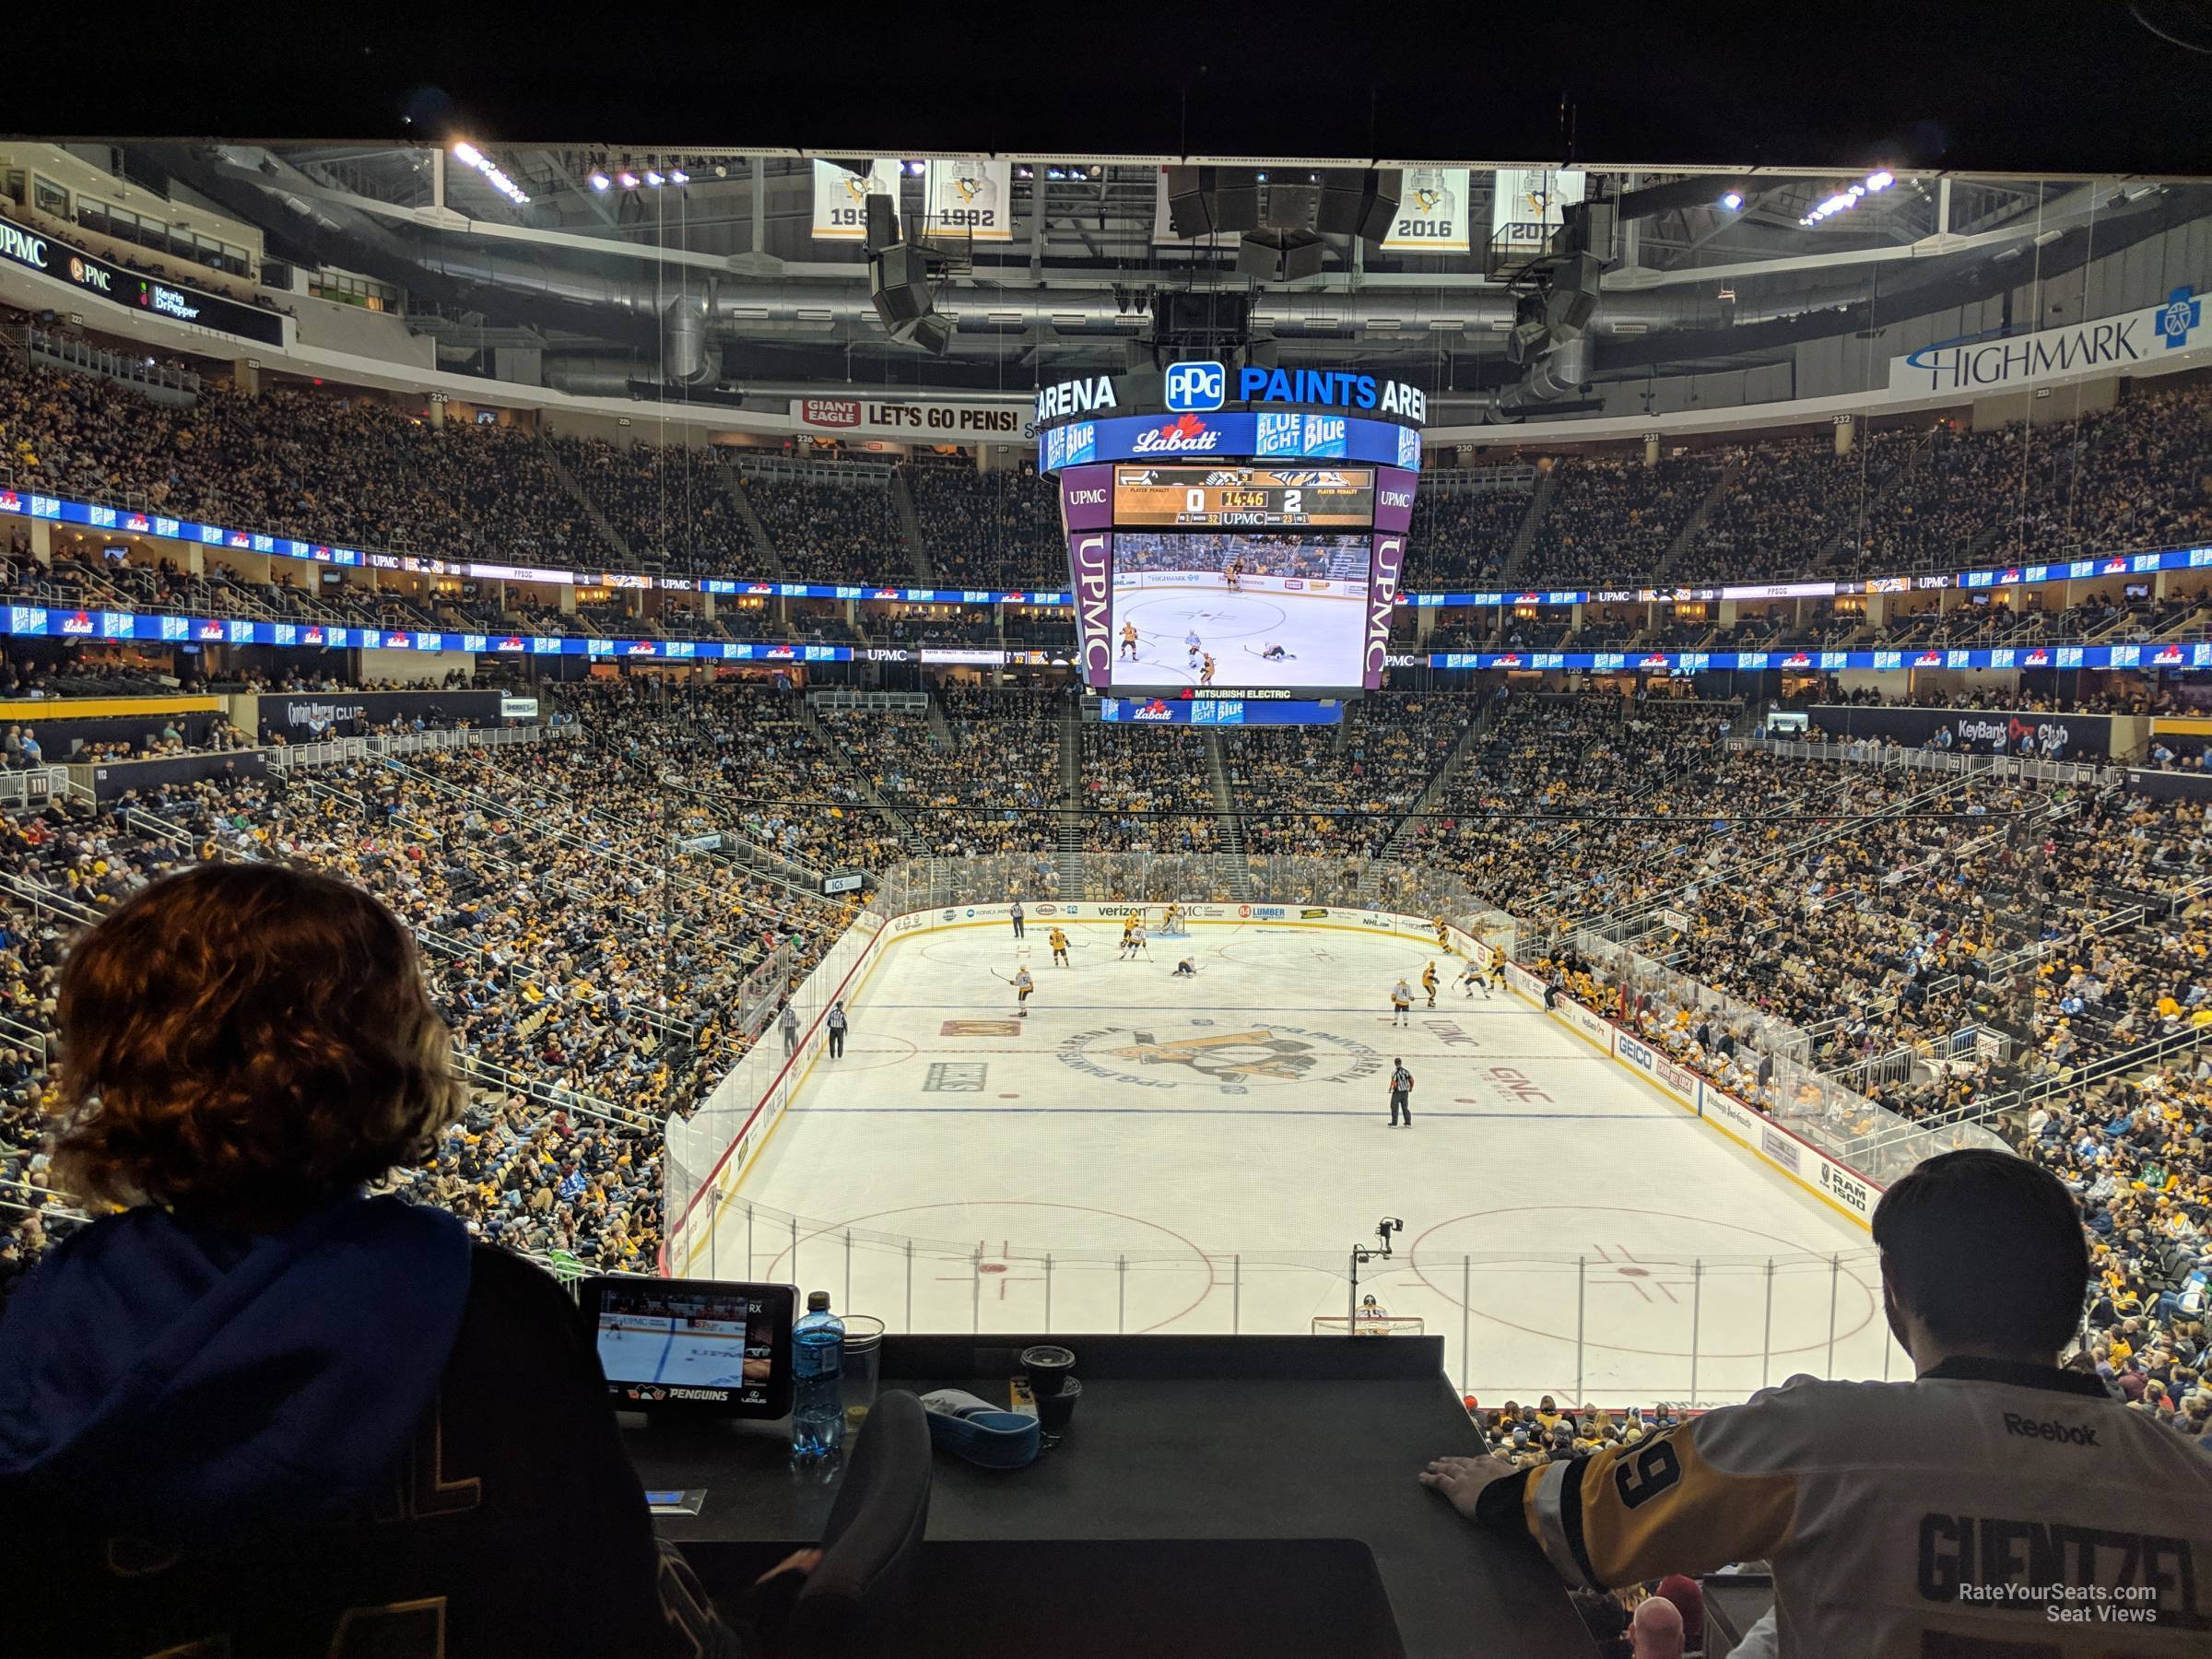 loge box 13 seat view  for hockey - ppg paints arena